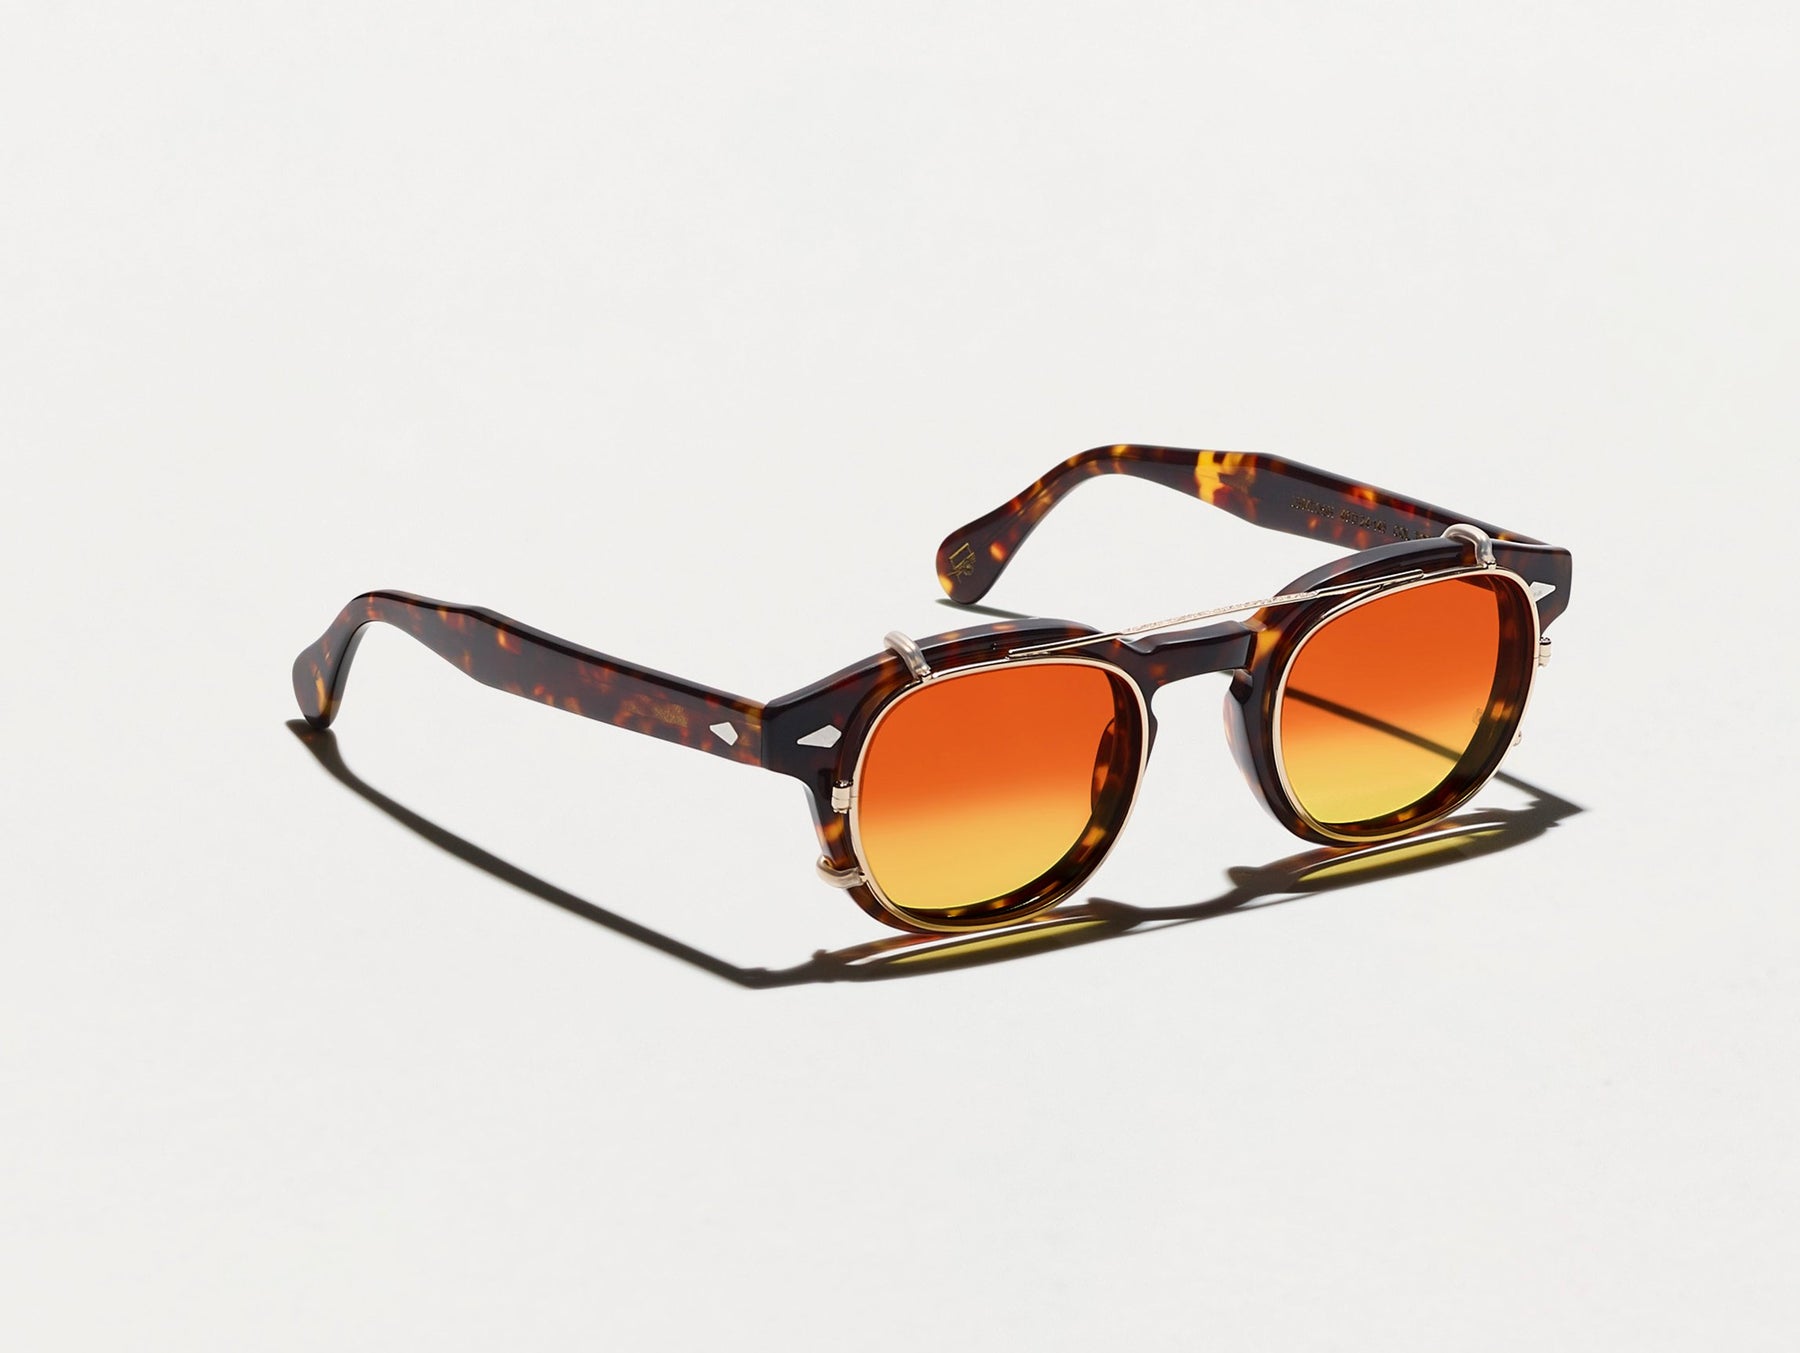 The CLIPTOSH in Gold with Candy Corn Tinted Lenses